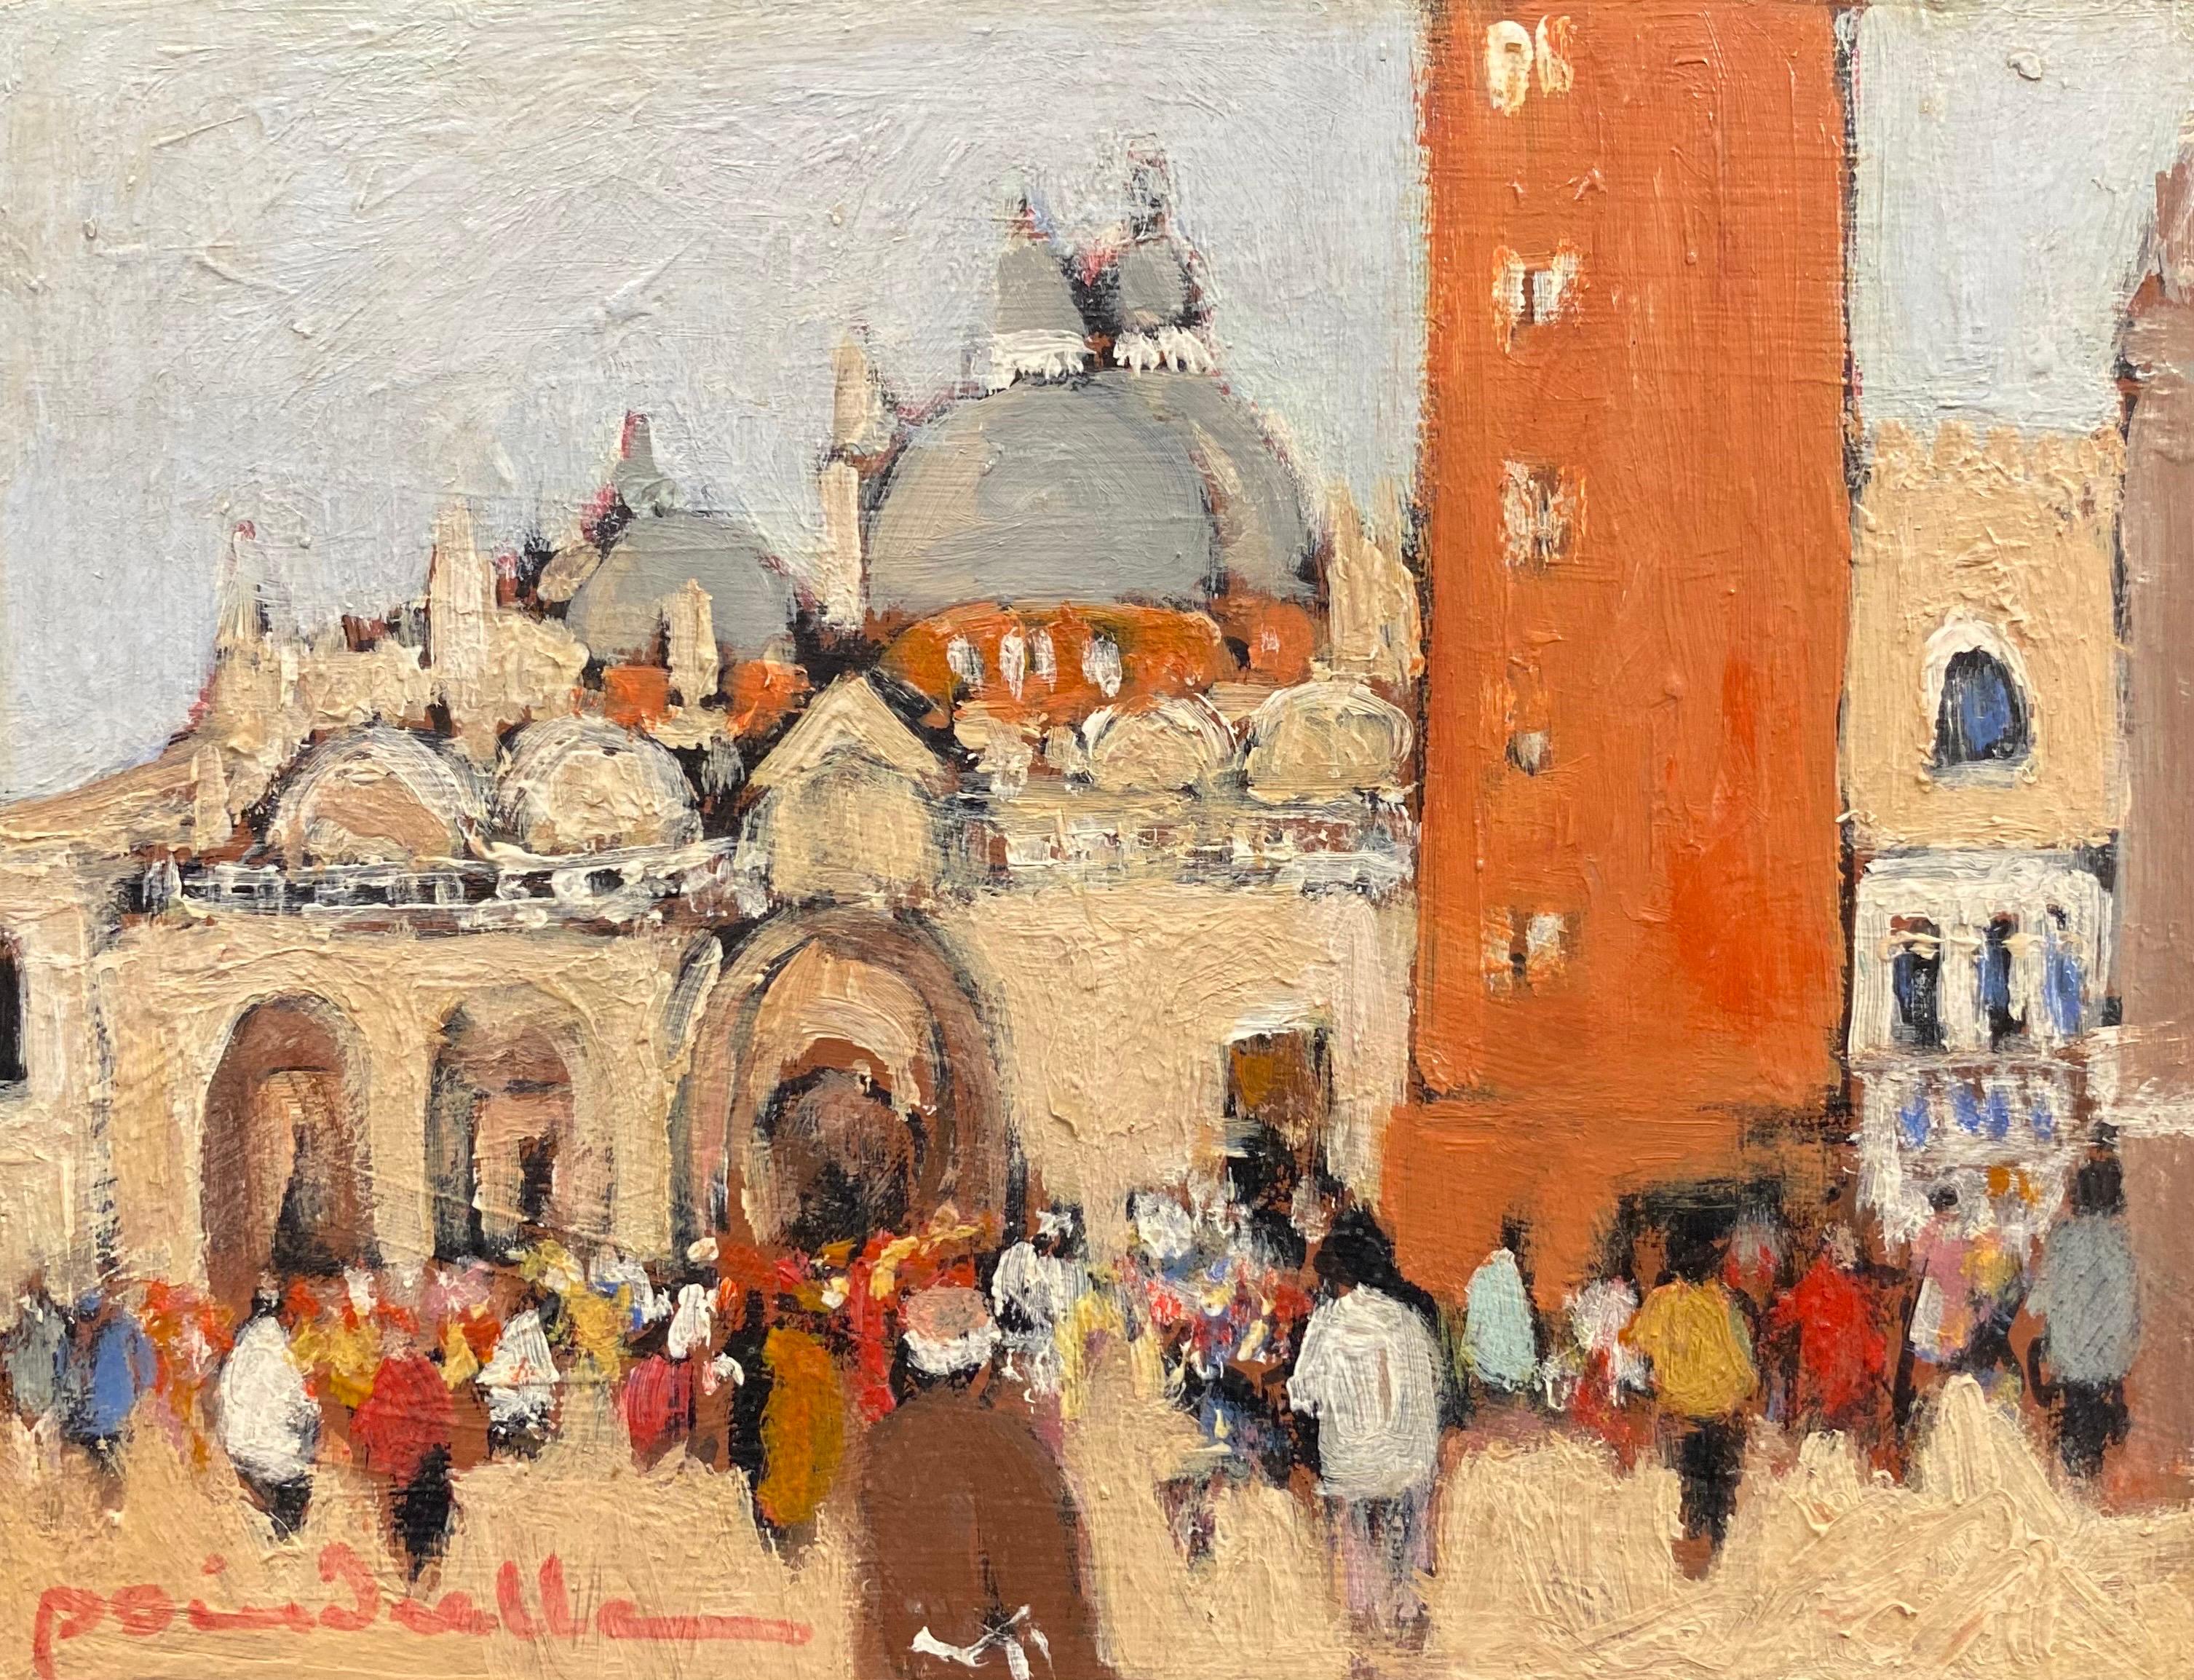 Patrice Poindrelle Landscape Painting - Piazza San Marco Venice, Busy Figures in Square, Signed French oil 